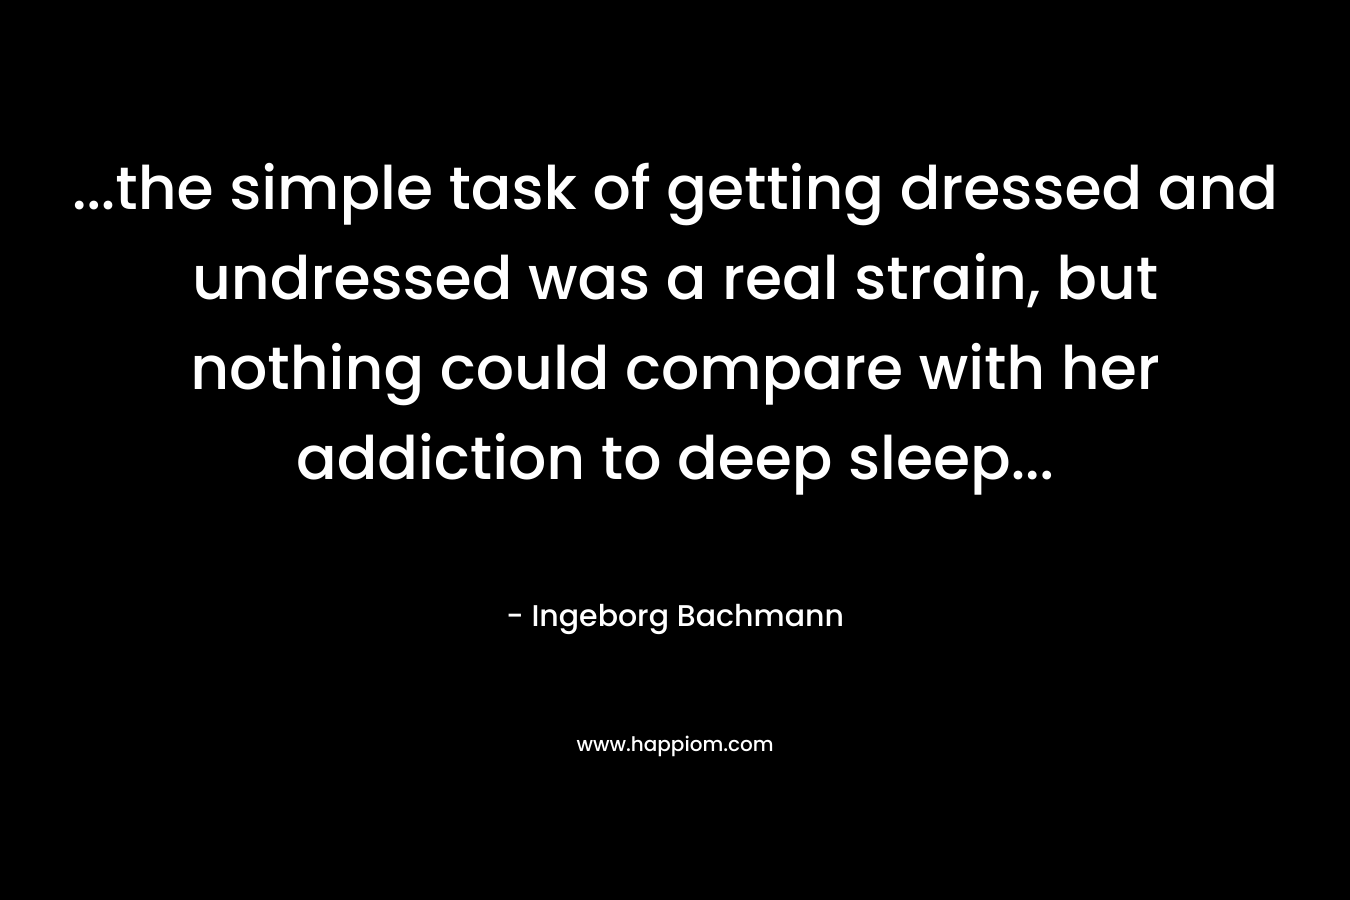 …the simple task of getting dressed and undressed was a real strain, but nothing could compare with her addiction to deep sleep… – Ingeborg Bachmann